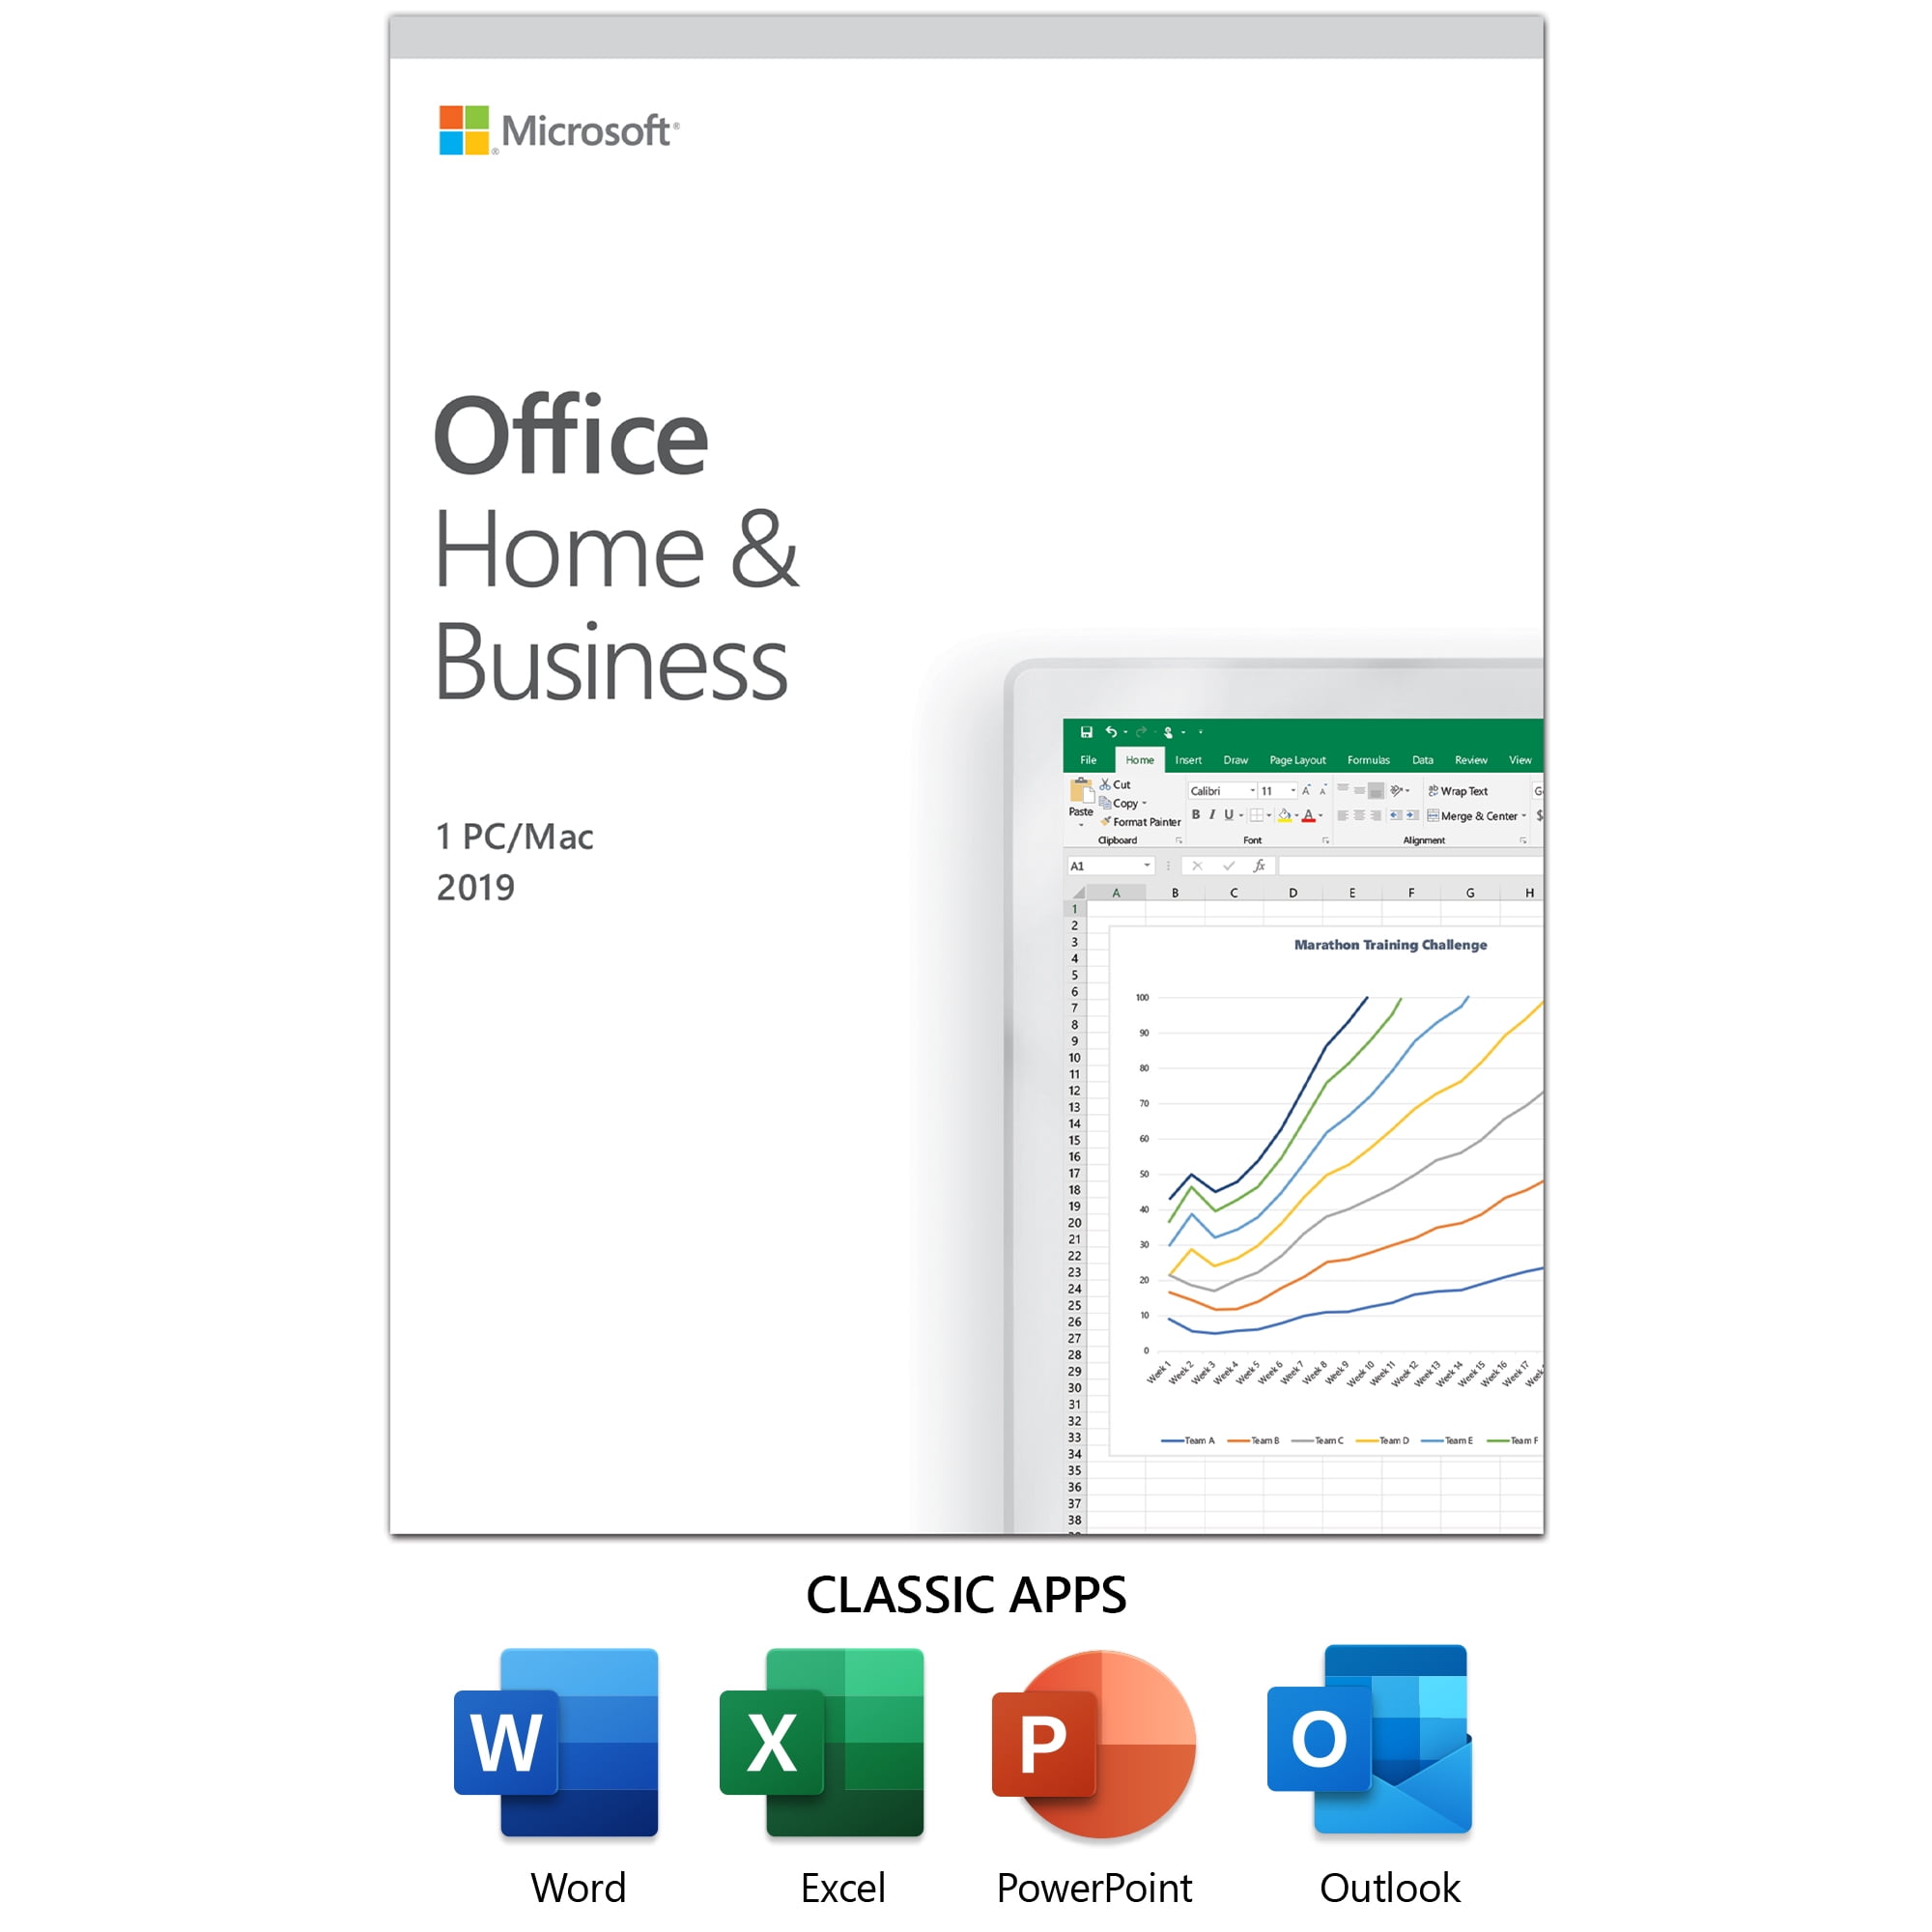 Microsoft Office Home & Business 2019 | One-time purchase, 1